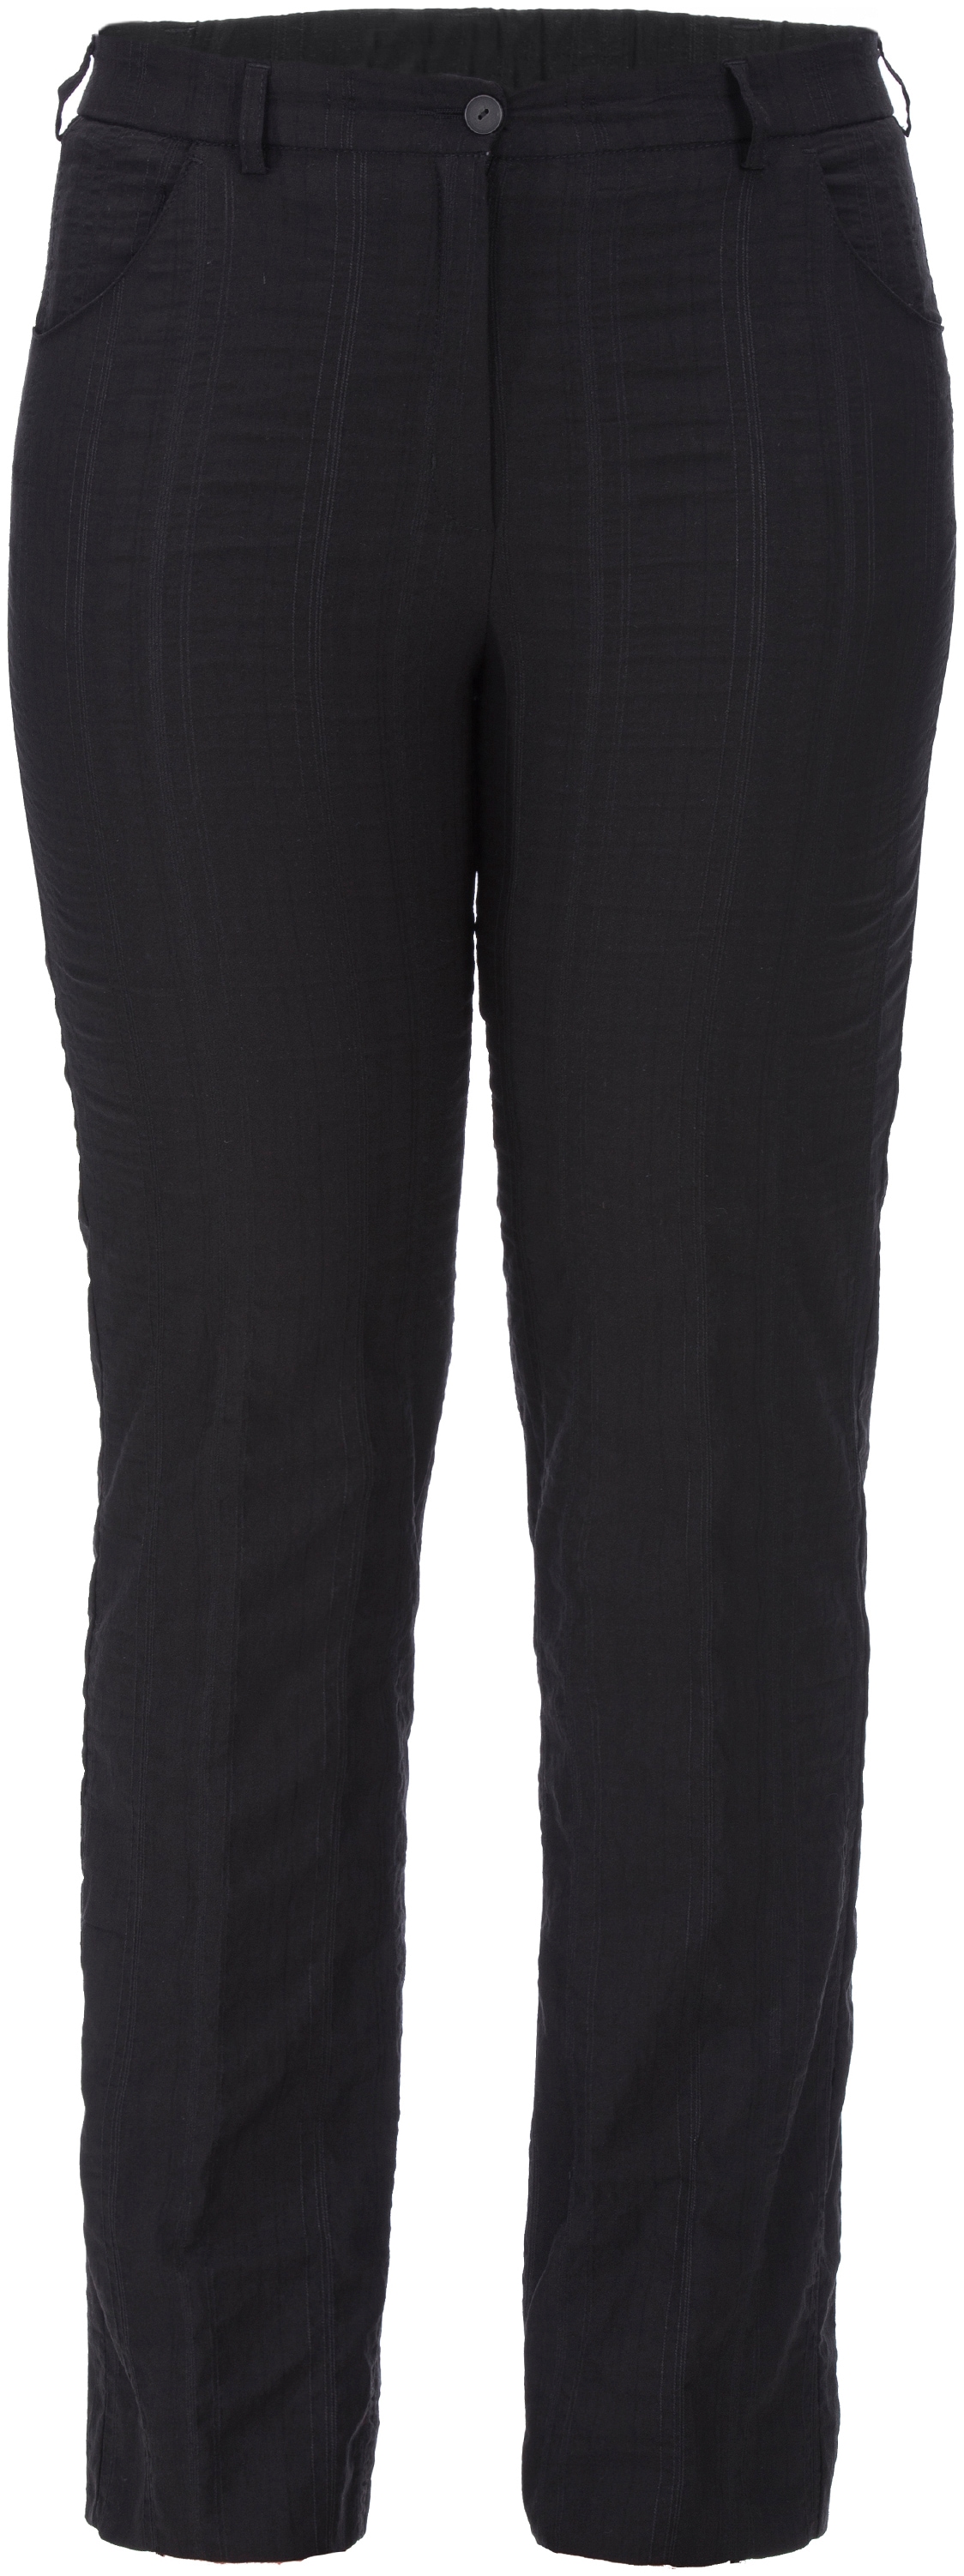 KjBRAND Stoffhose »Bea«, optimale ♕ Quer-Stretch in bei Passform